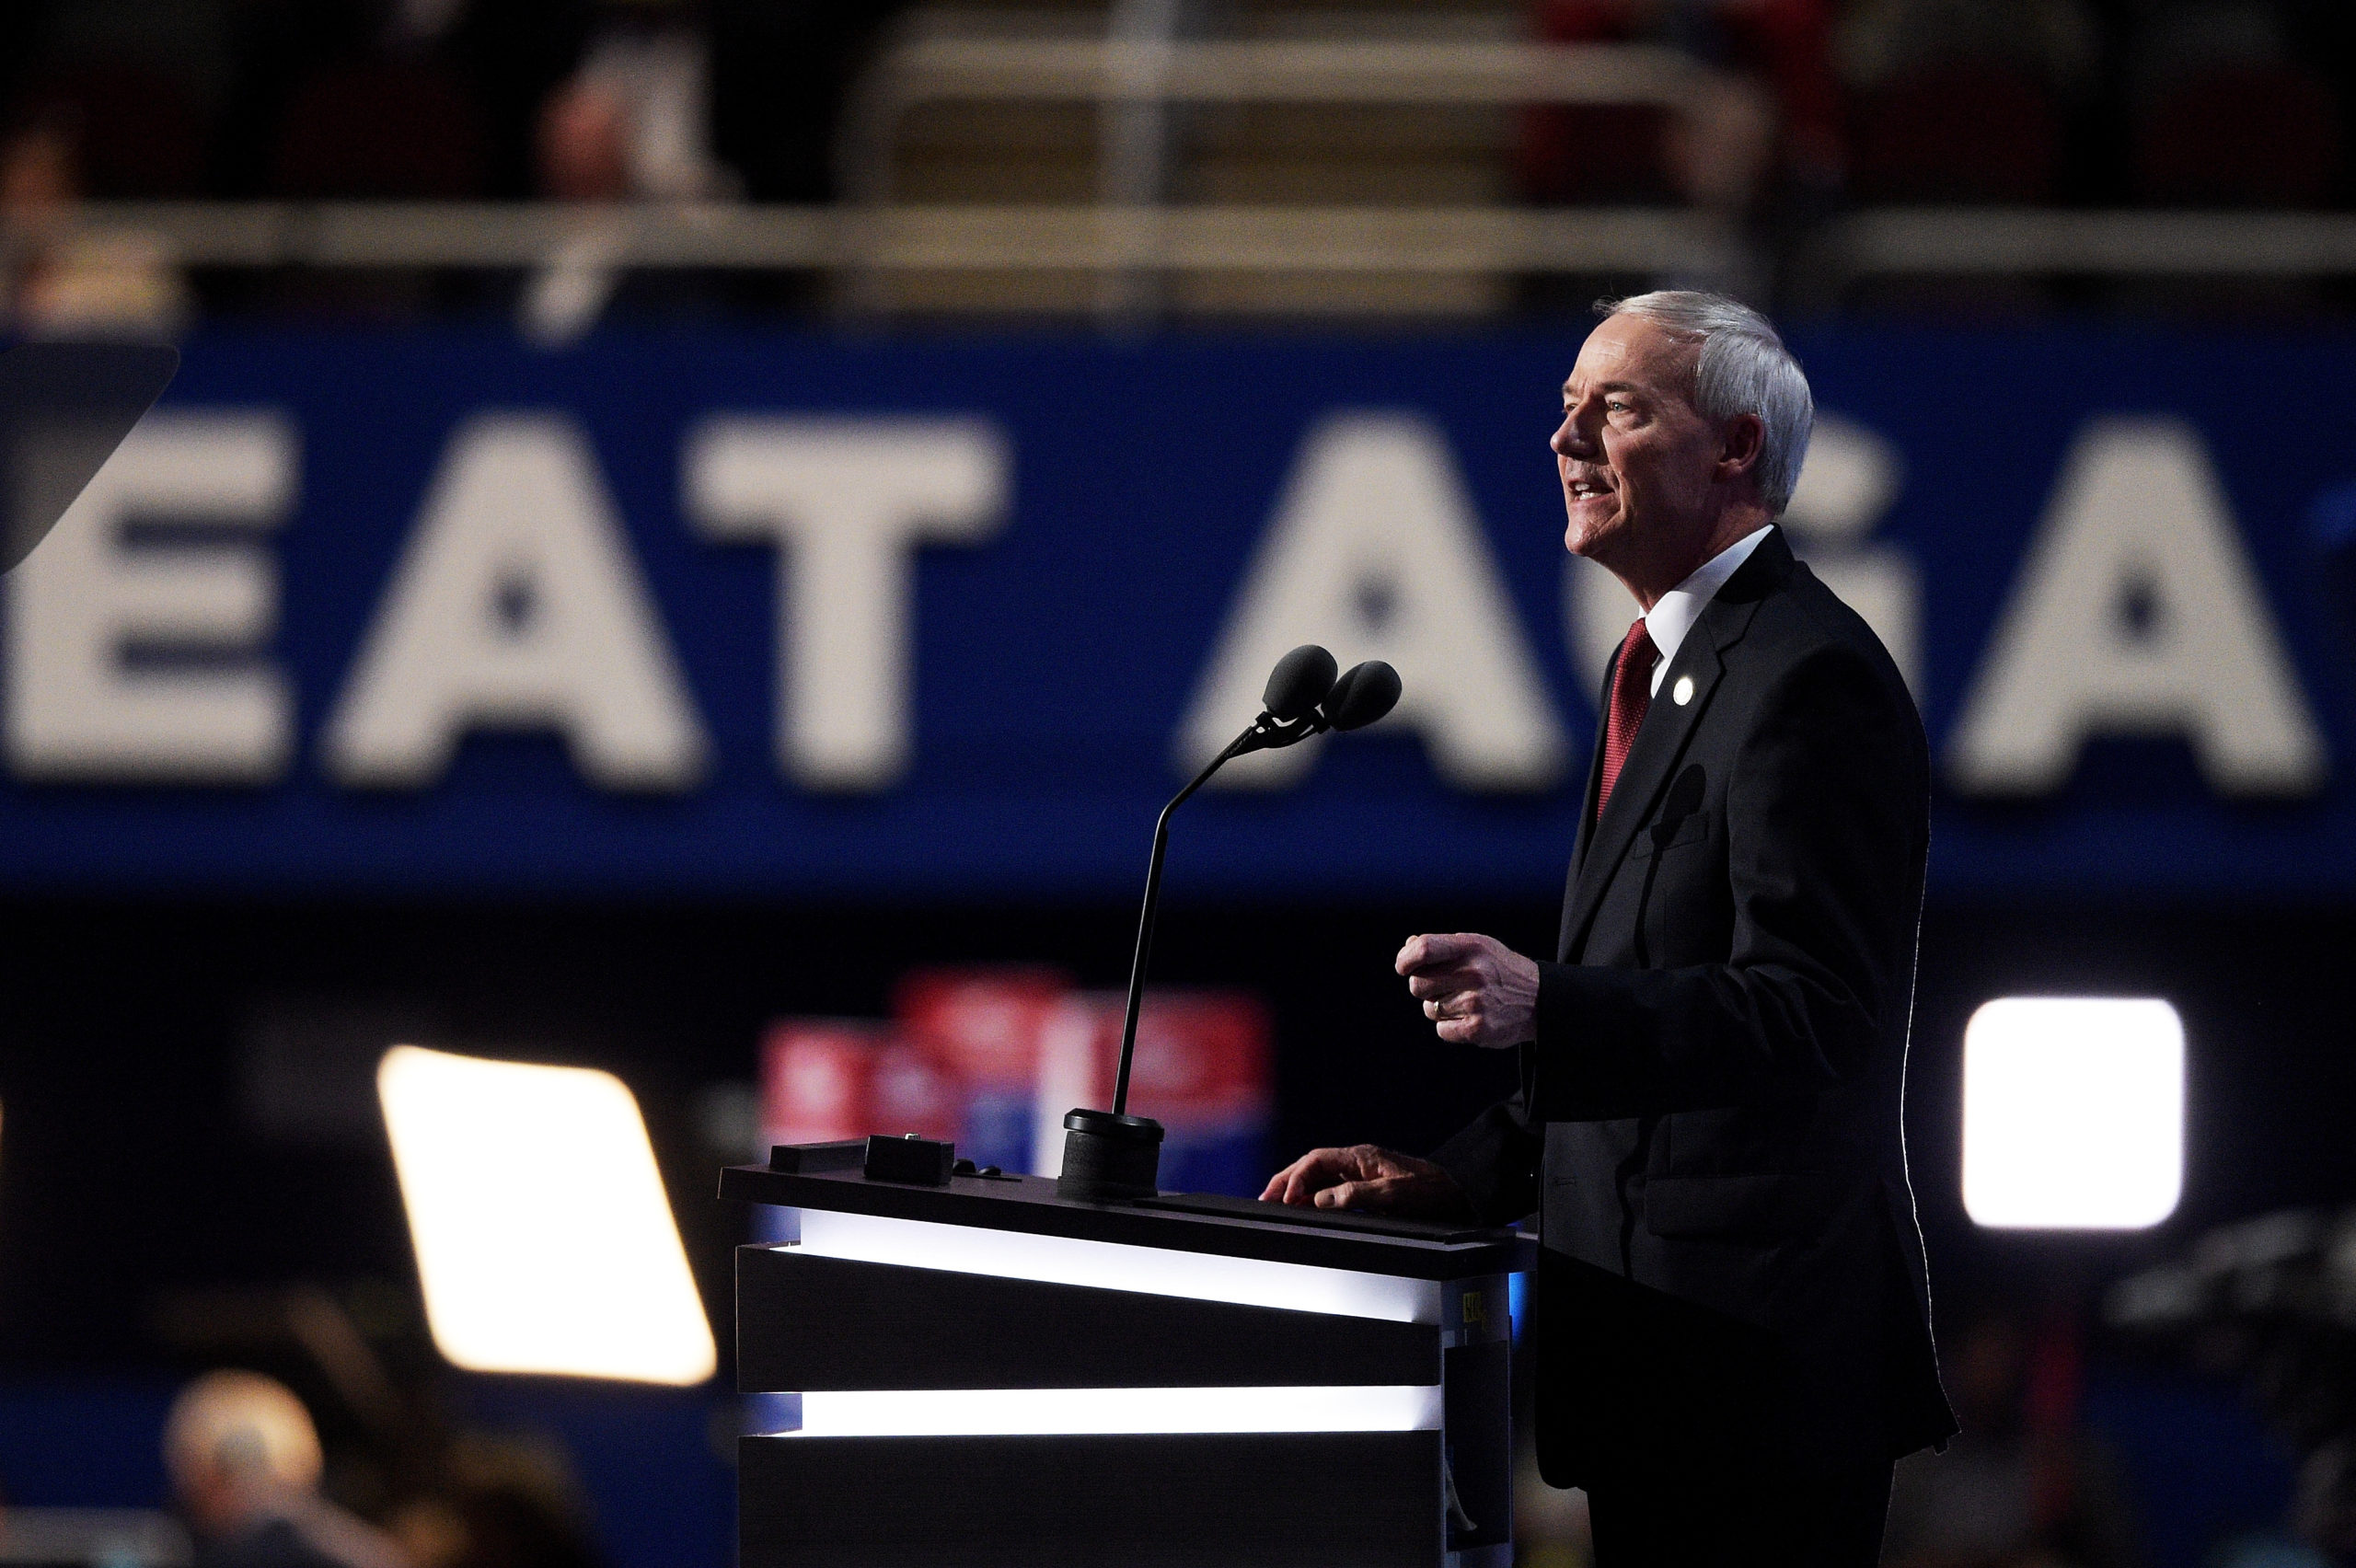 CLEVELAND, OH - JULY 19: Gov. Asa Hutchinson (R-AR) delivers a speech on the second day of the Republican National Convention on July 19, 2016 at the Quicken Loans Arena in Cleveland, Ohio. Republican presidential candidate Donald Trump received the number of votes needed to secure the party's nomination. An estimated 50,000 people are expected in Cleveland, including hundreds of protesters and members of the media. The four-day Republican National Convention kicked off on July 18. (Photo by Jeff Swensen/Getty Images)